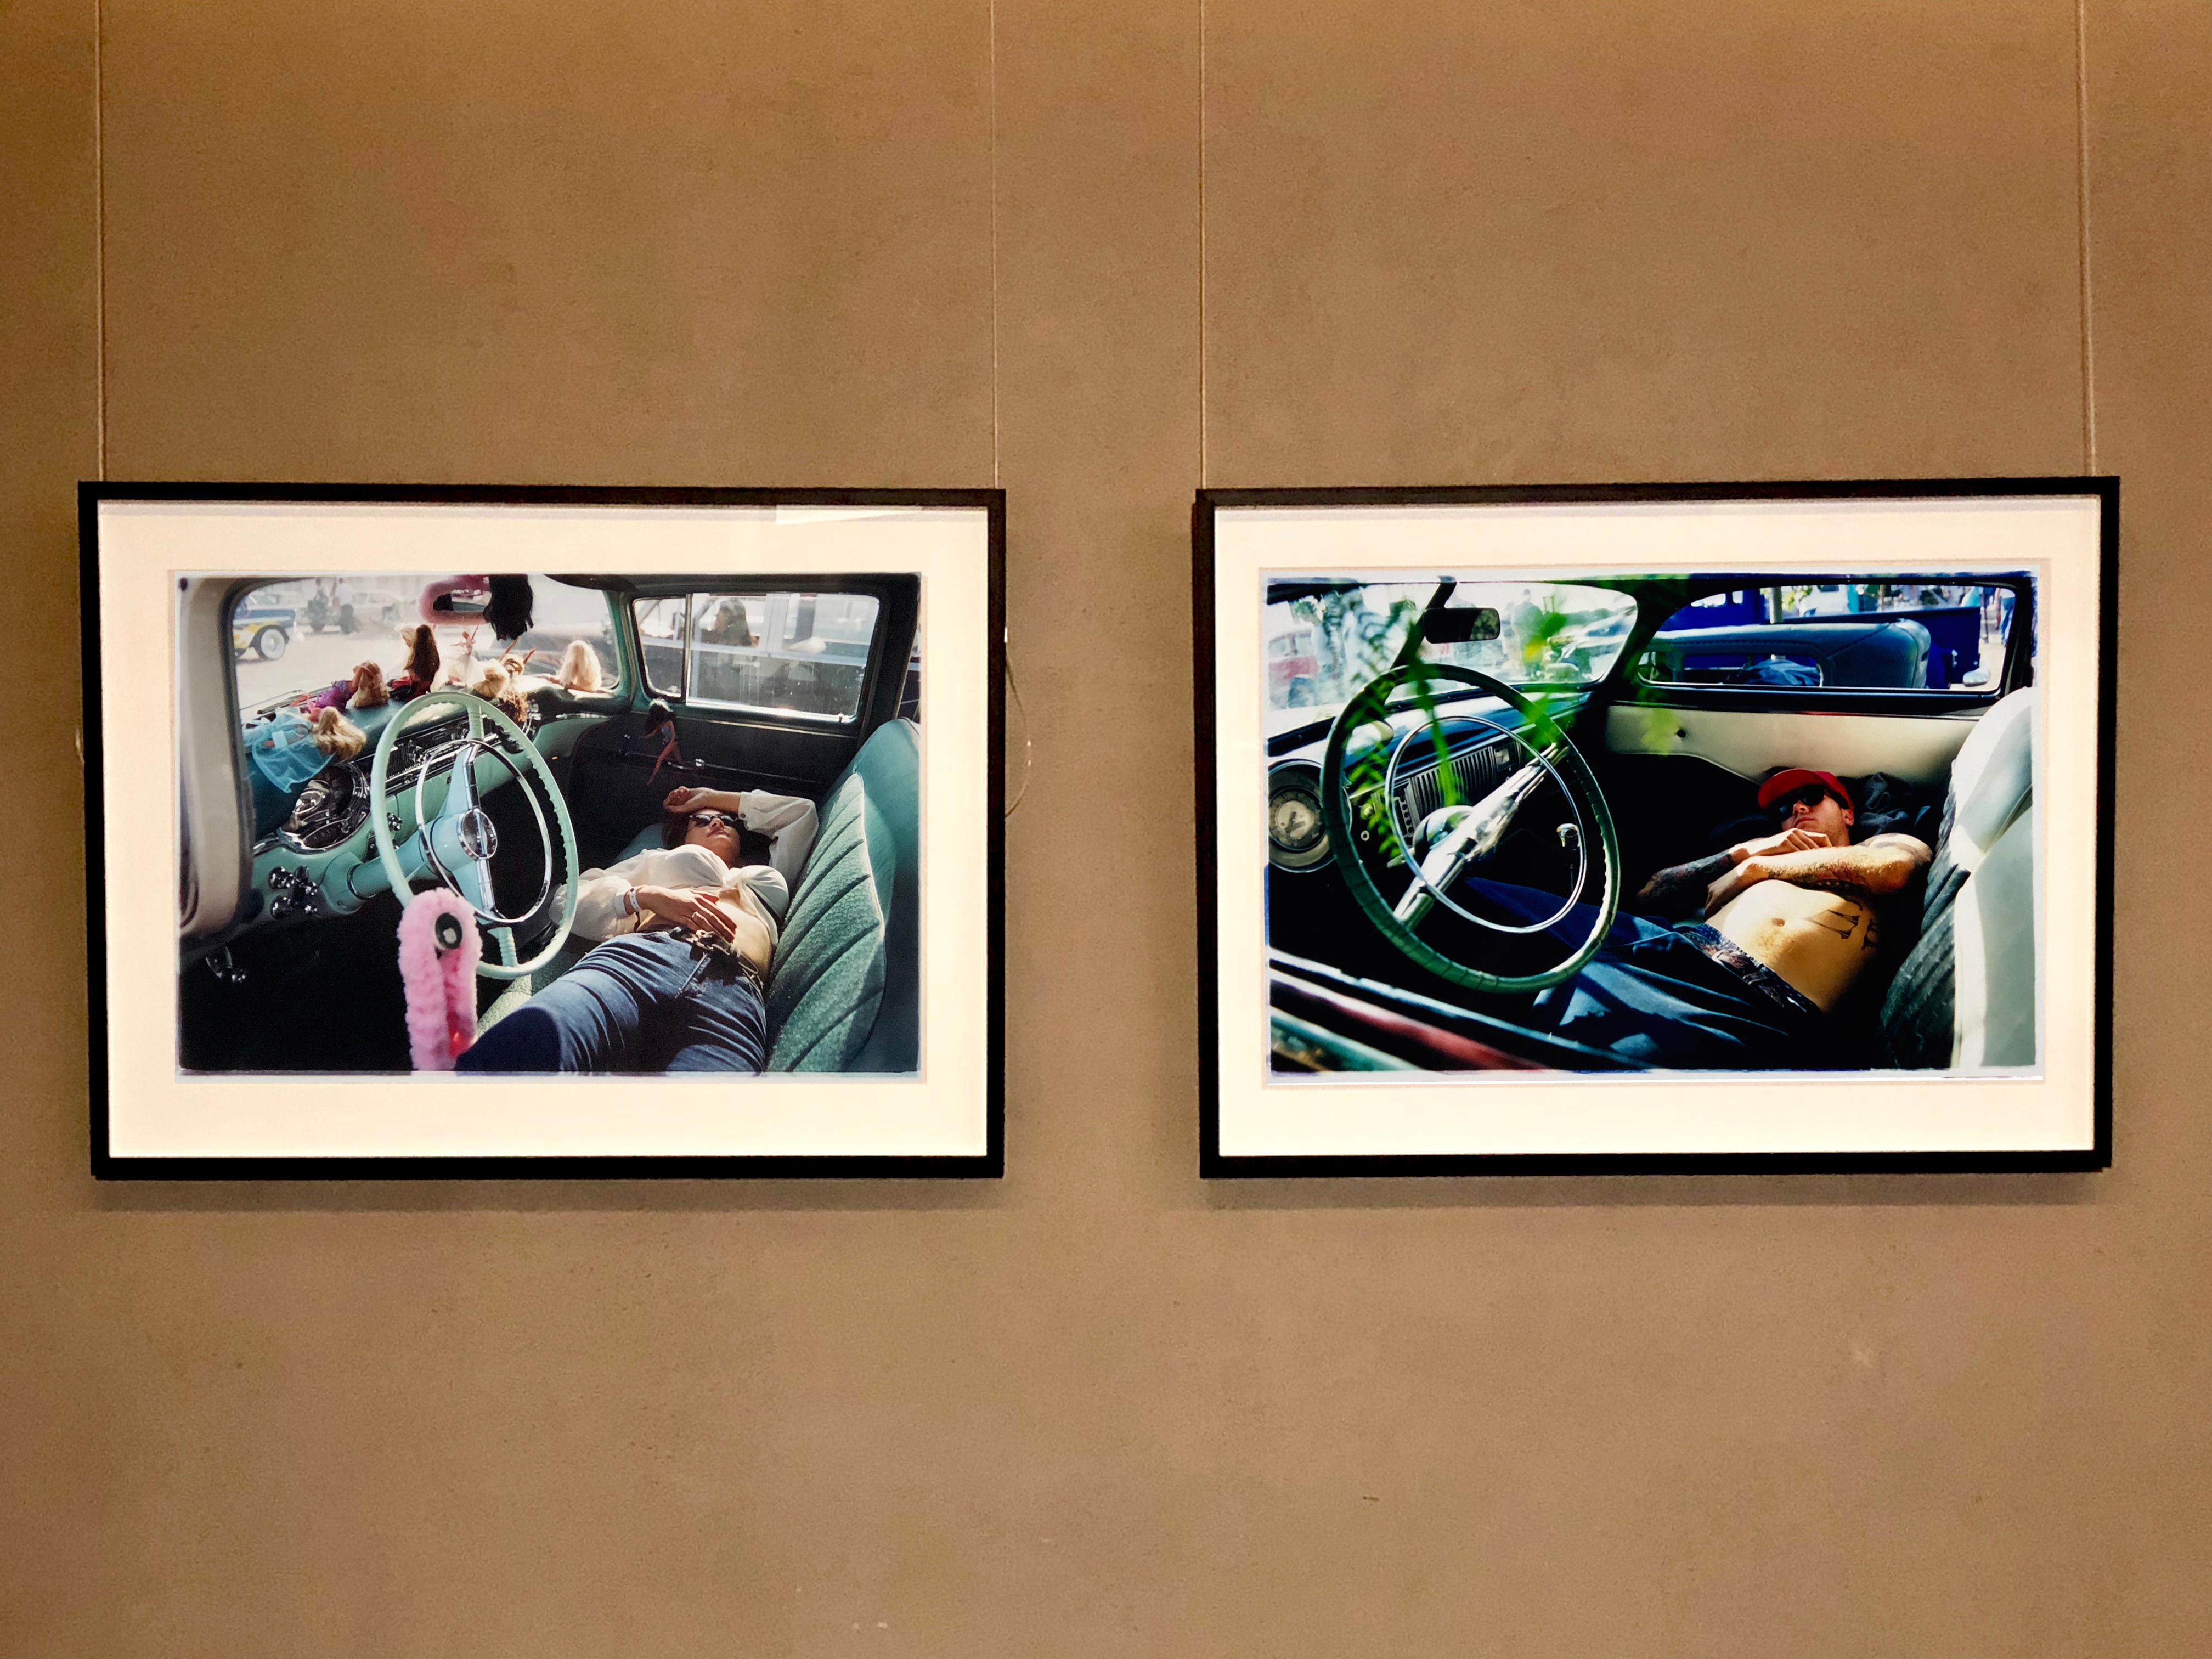 Part of Richard Heeps 'Man's Ruin' Series, this sequence of artworks 'Wendy Flamin' Eyeball', 'Wendy Resting' & 'Oldsmobile and Sinful Barbie's' were shot in Las Vegas.

This artwork is a limited edition of 25, gloss photographic print. Accompanied